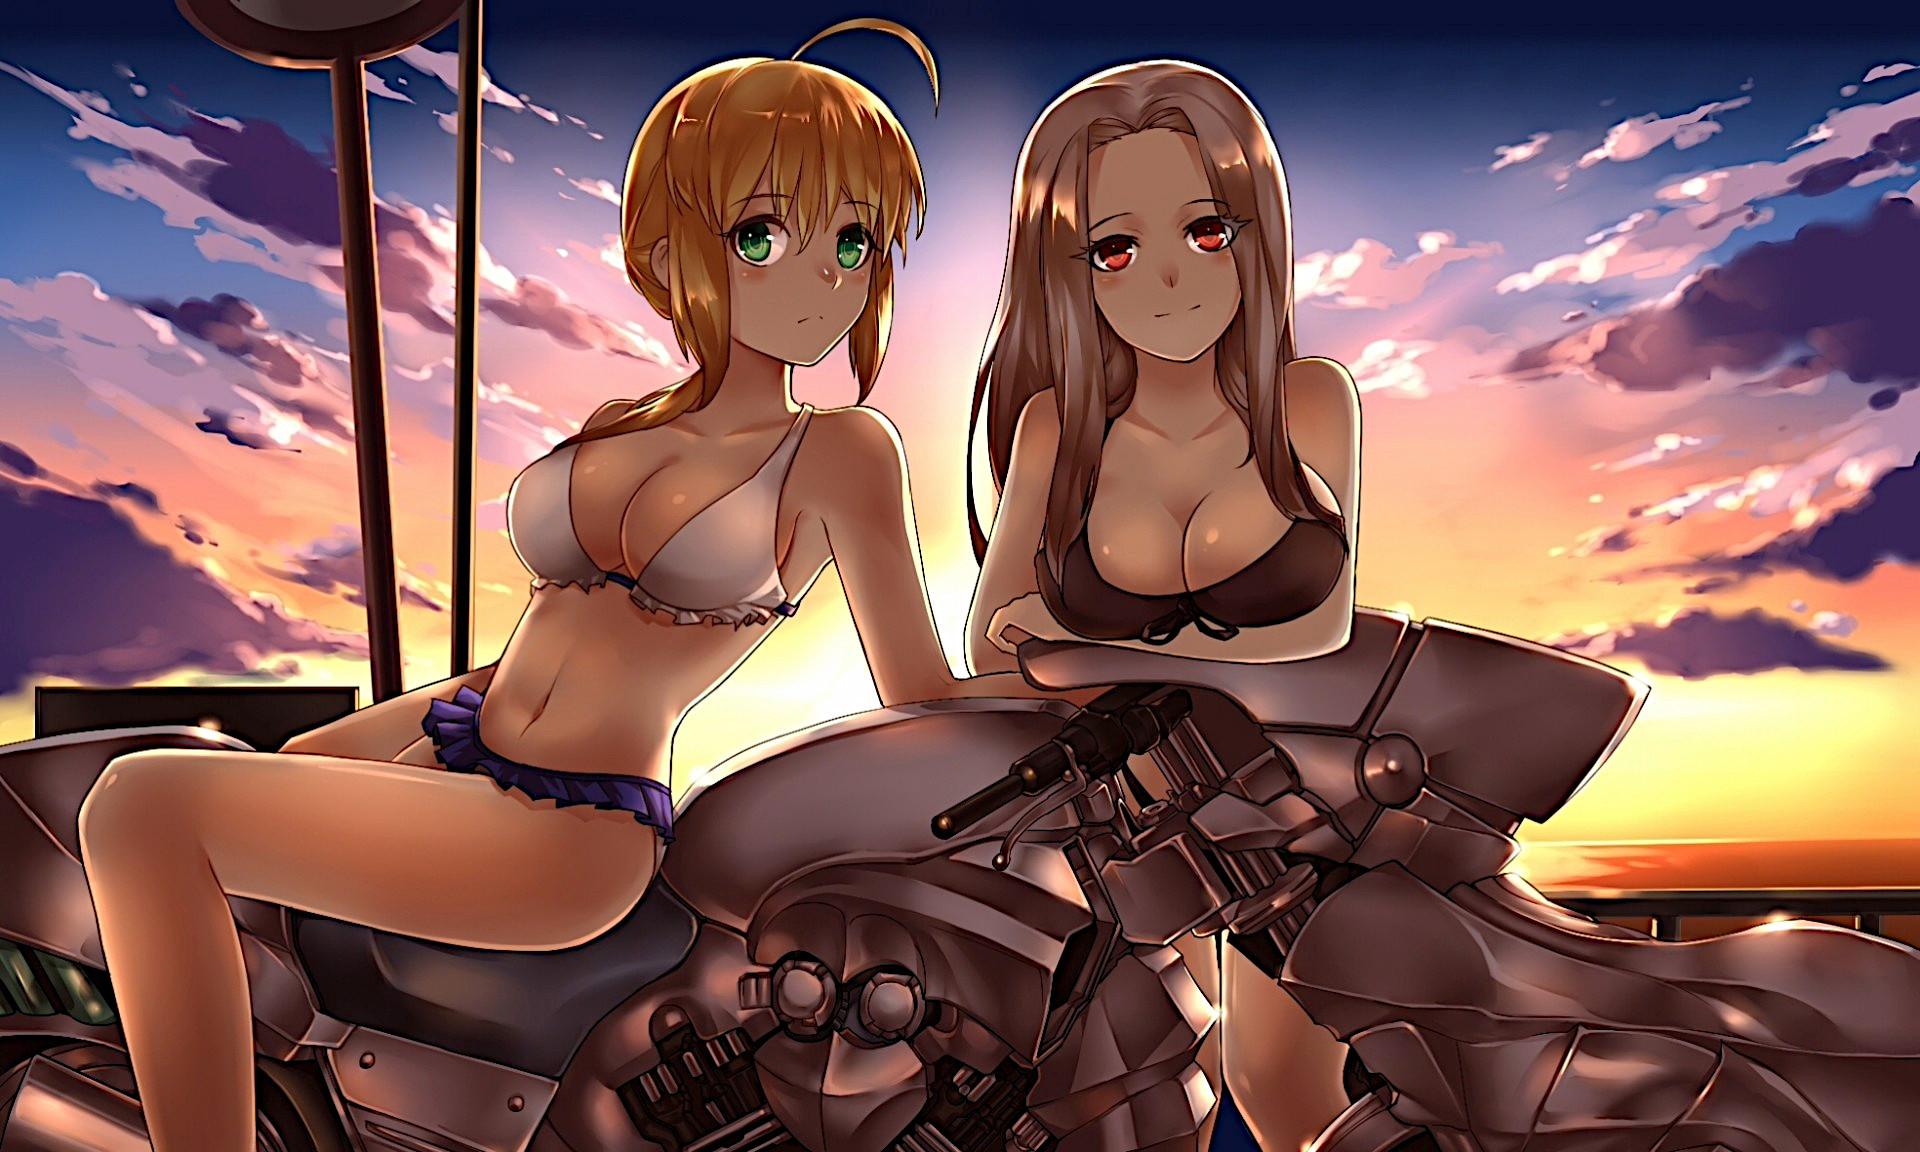 Wallpapers an anime girls motorcycle on the desktop